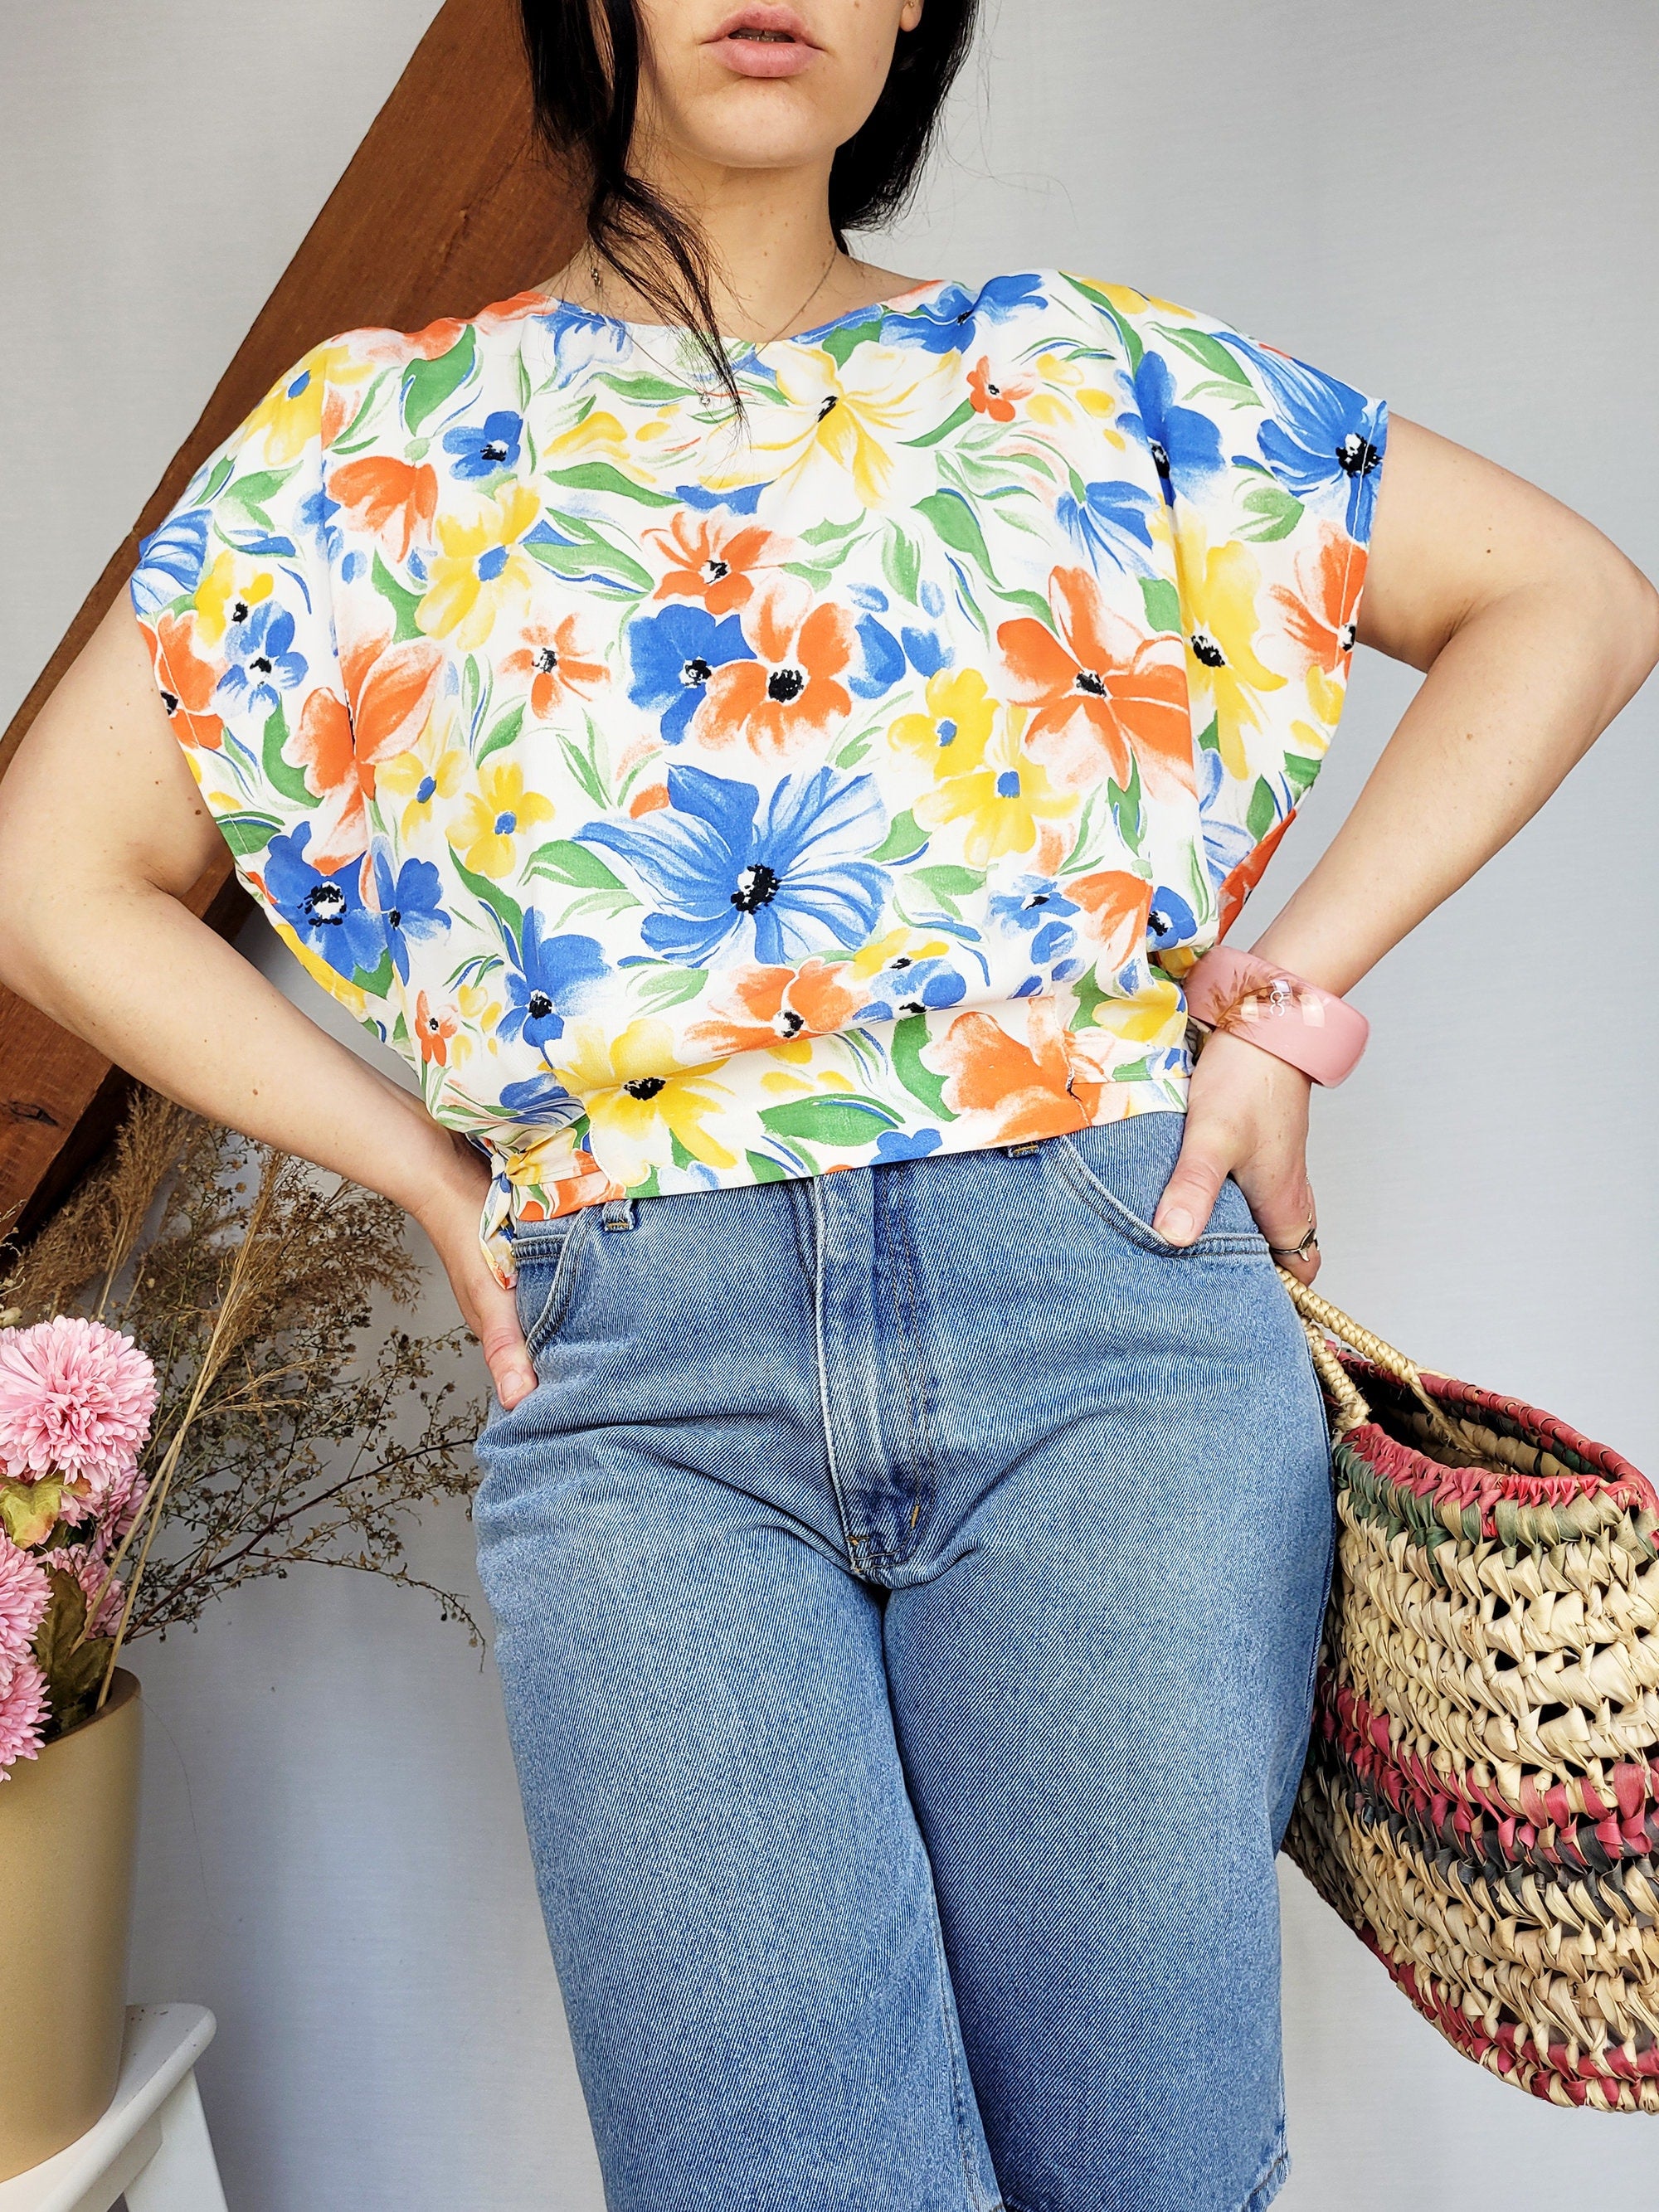 Vintage 90s colorful handmade floral blouse top